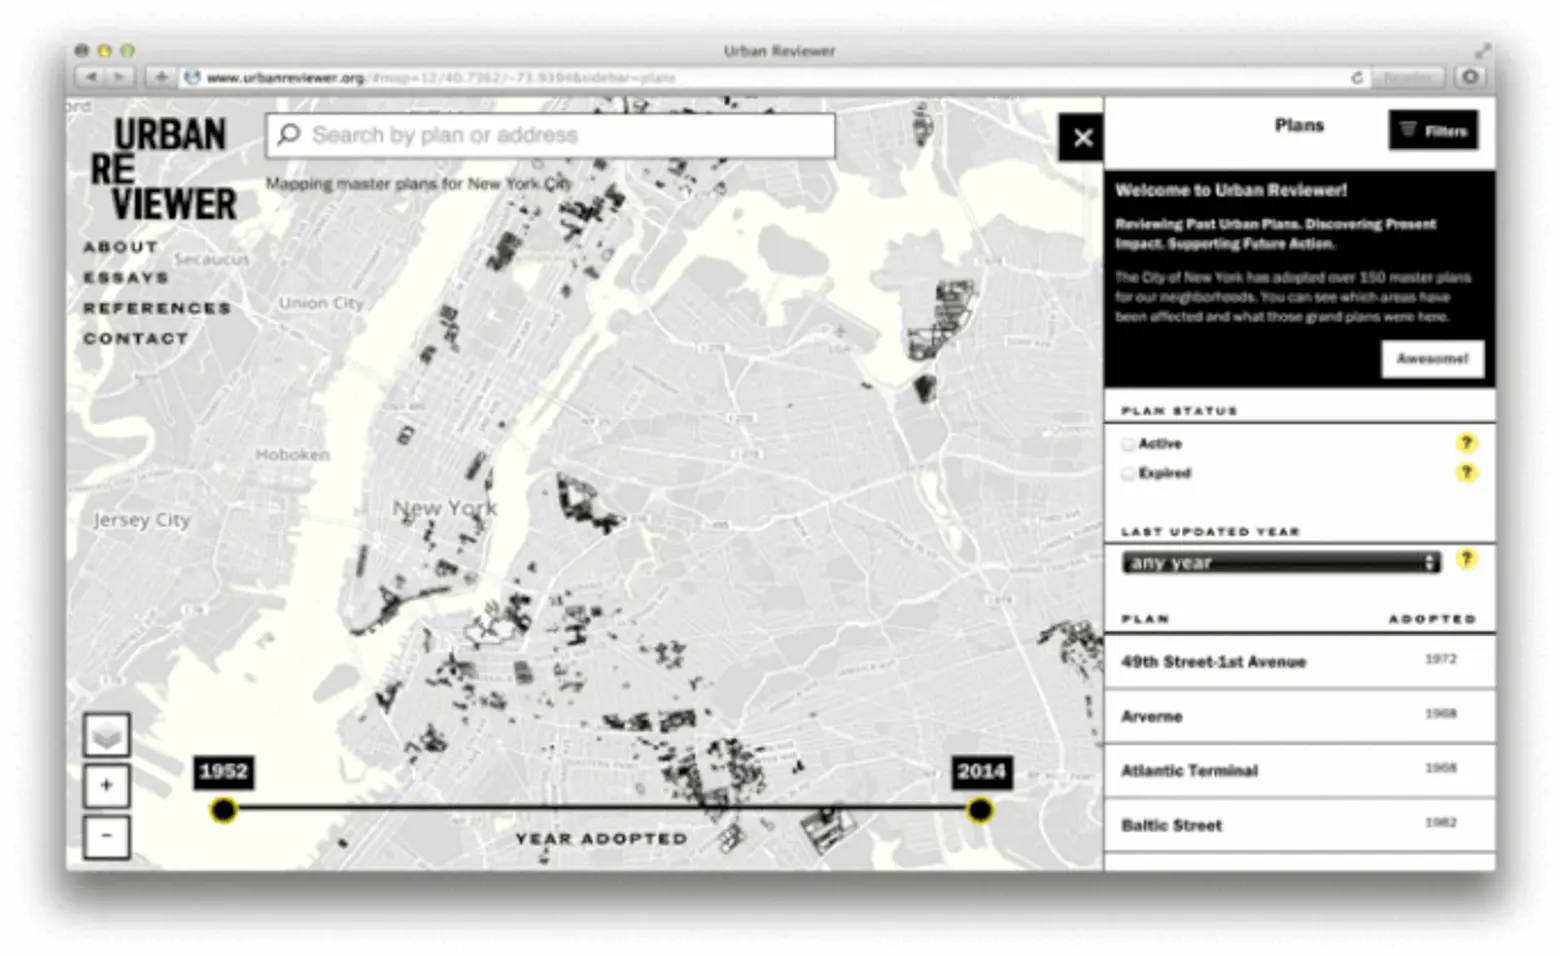 Urban Reviewer: A New Map Tool Reveals NYC’s Vacant Lots Ready for Revitalization